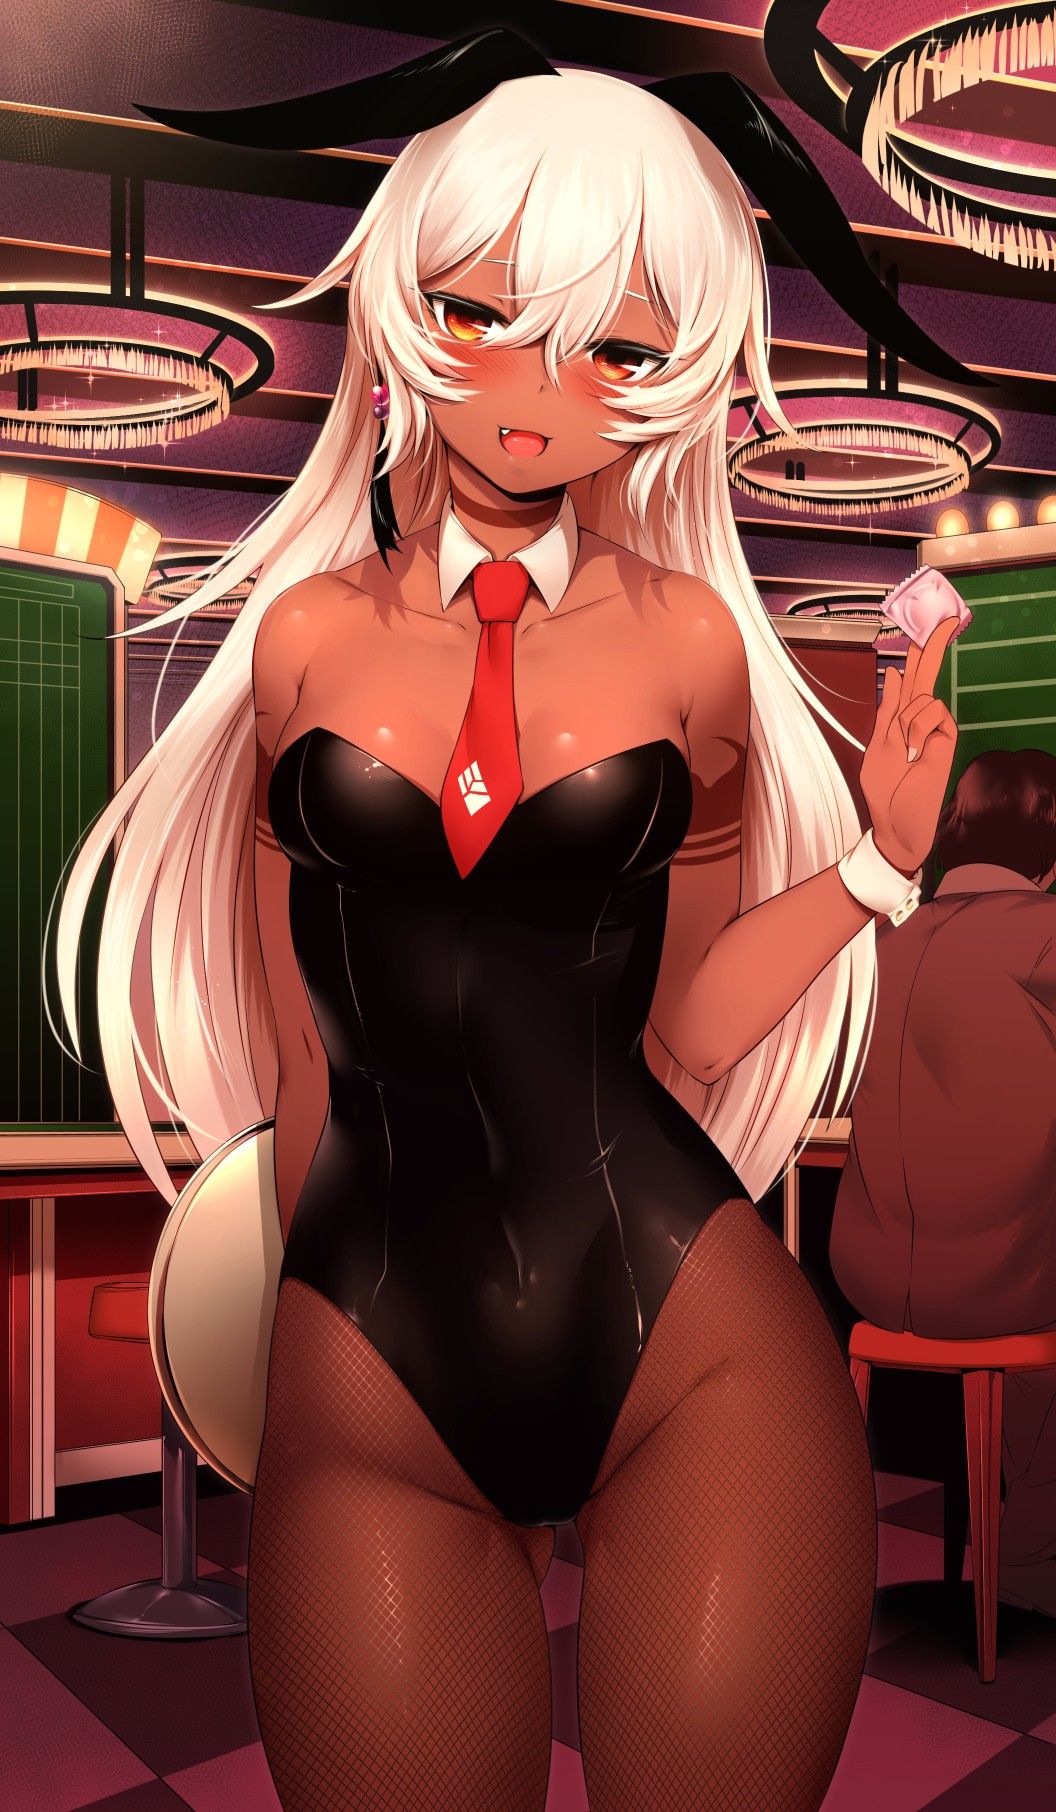 Up the erotic image of bunny girl! 4